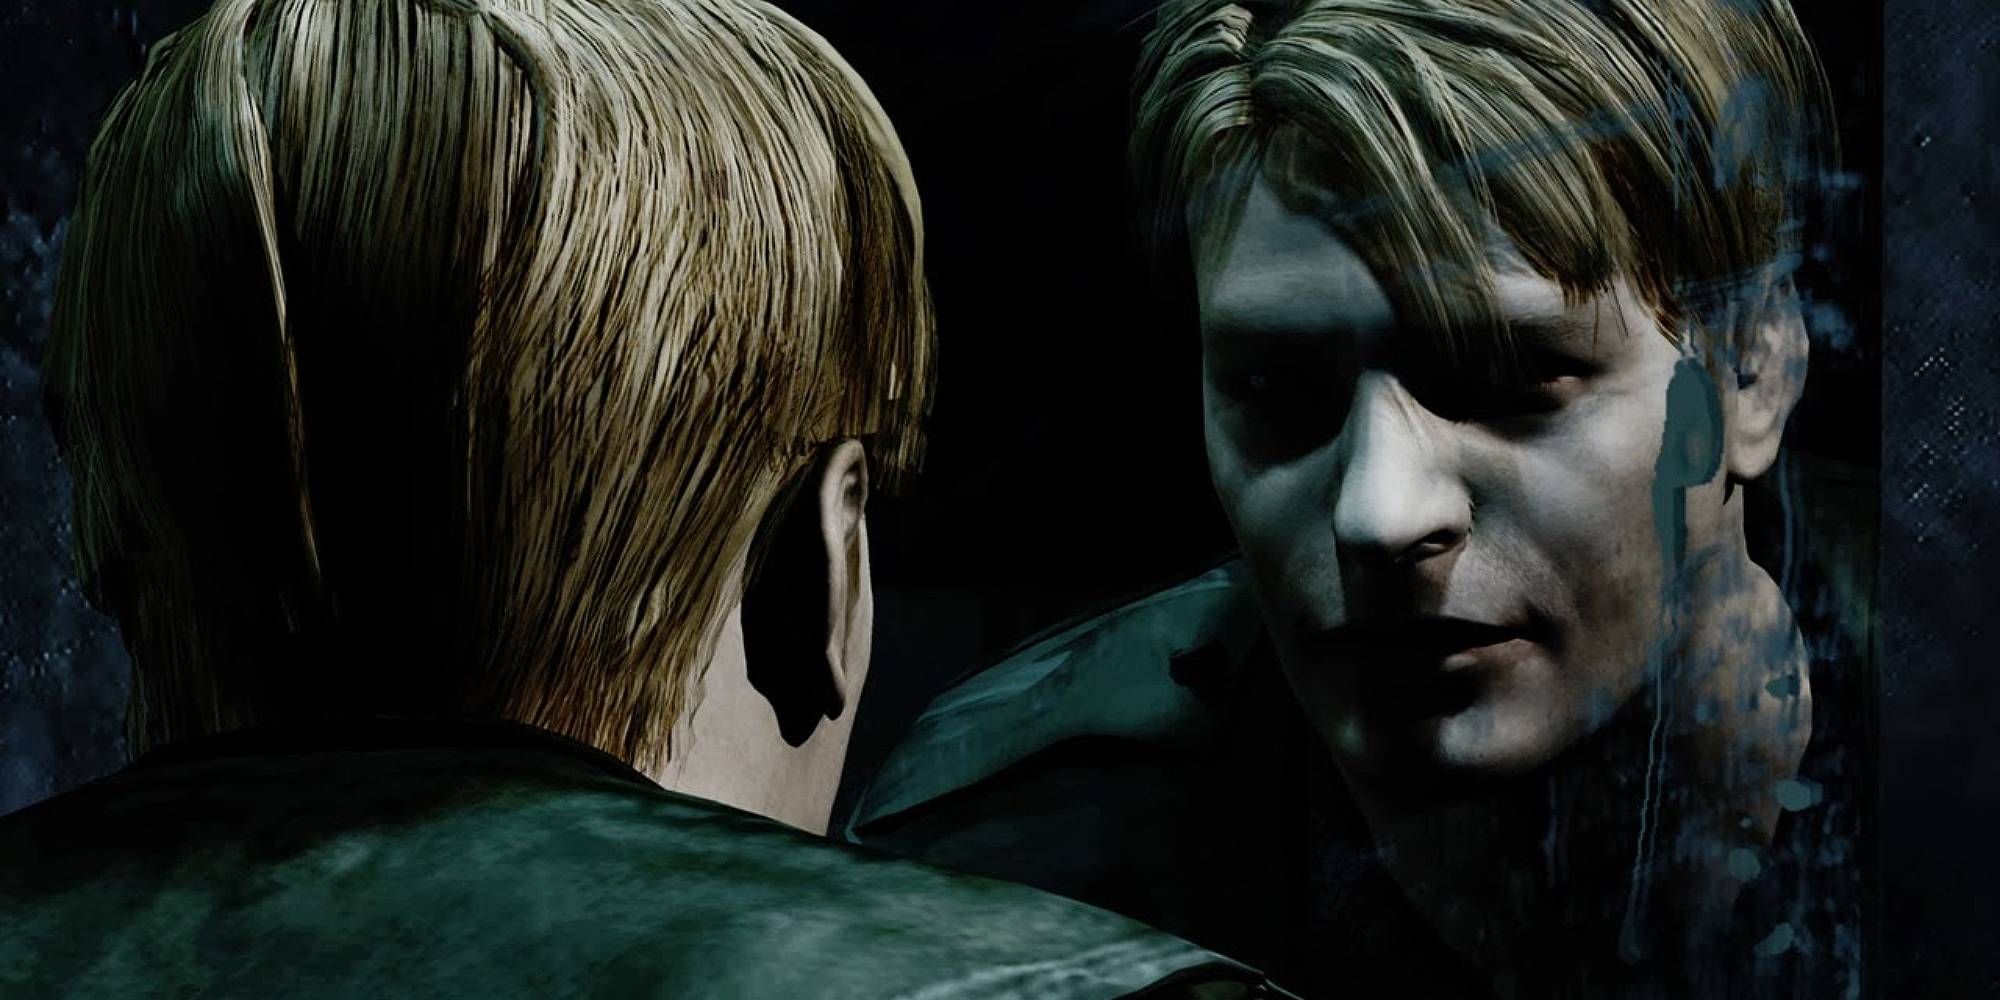 James Sunderland looking in the mirror in this iconic scene from Silent Hill 2